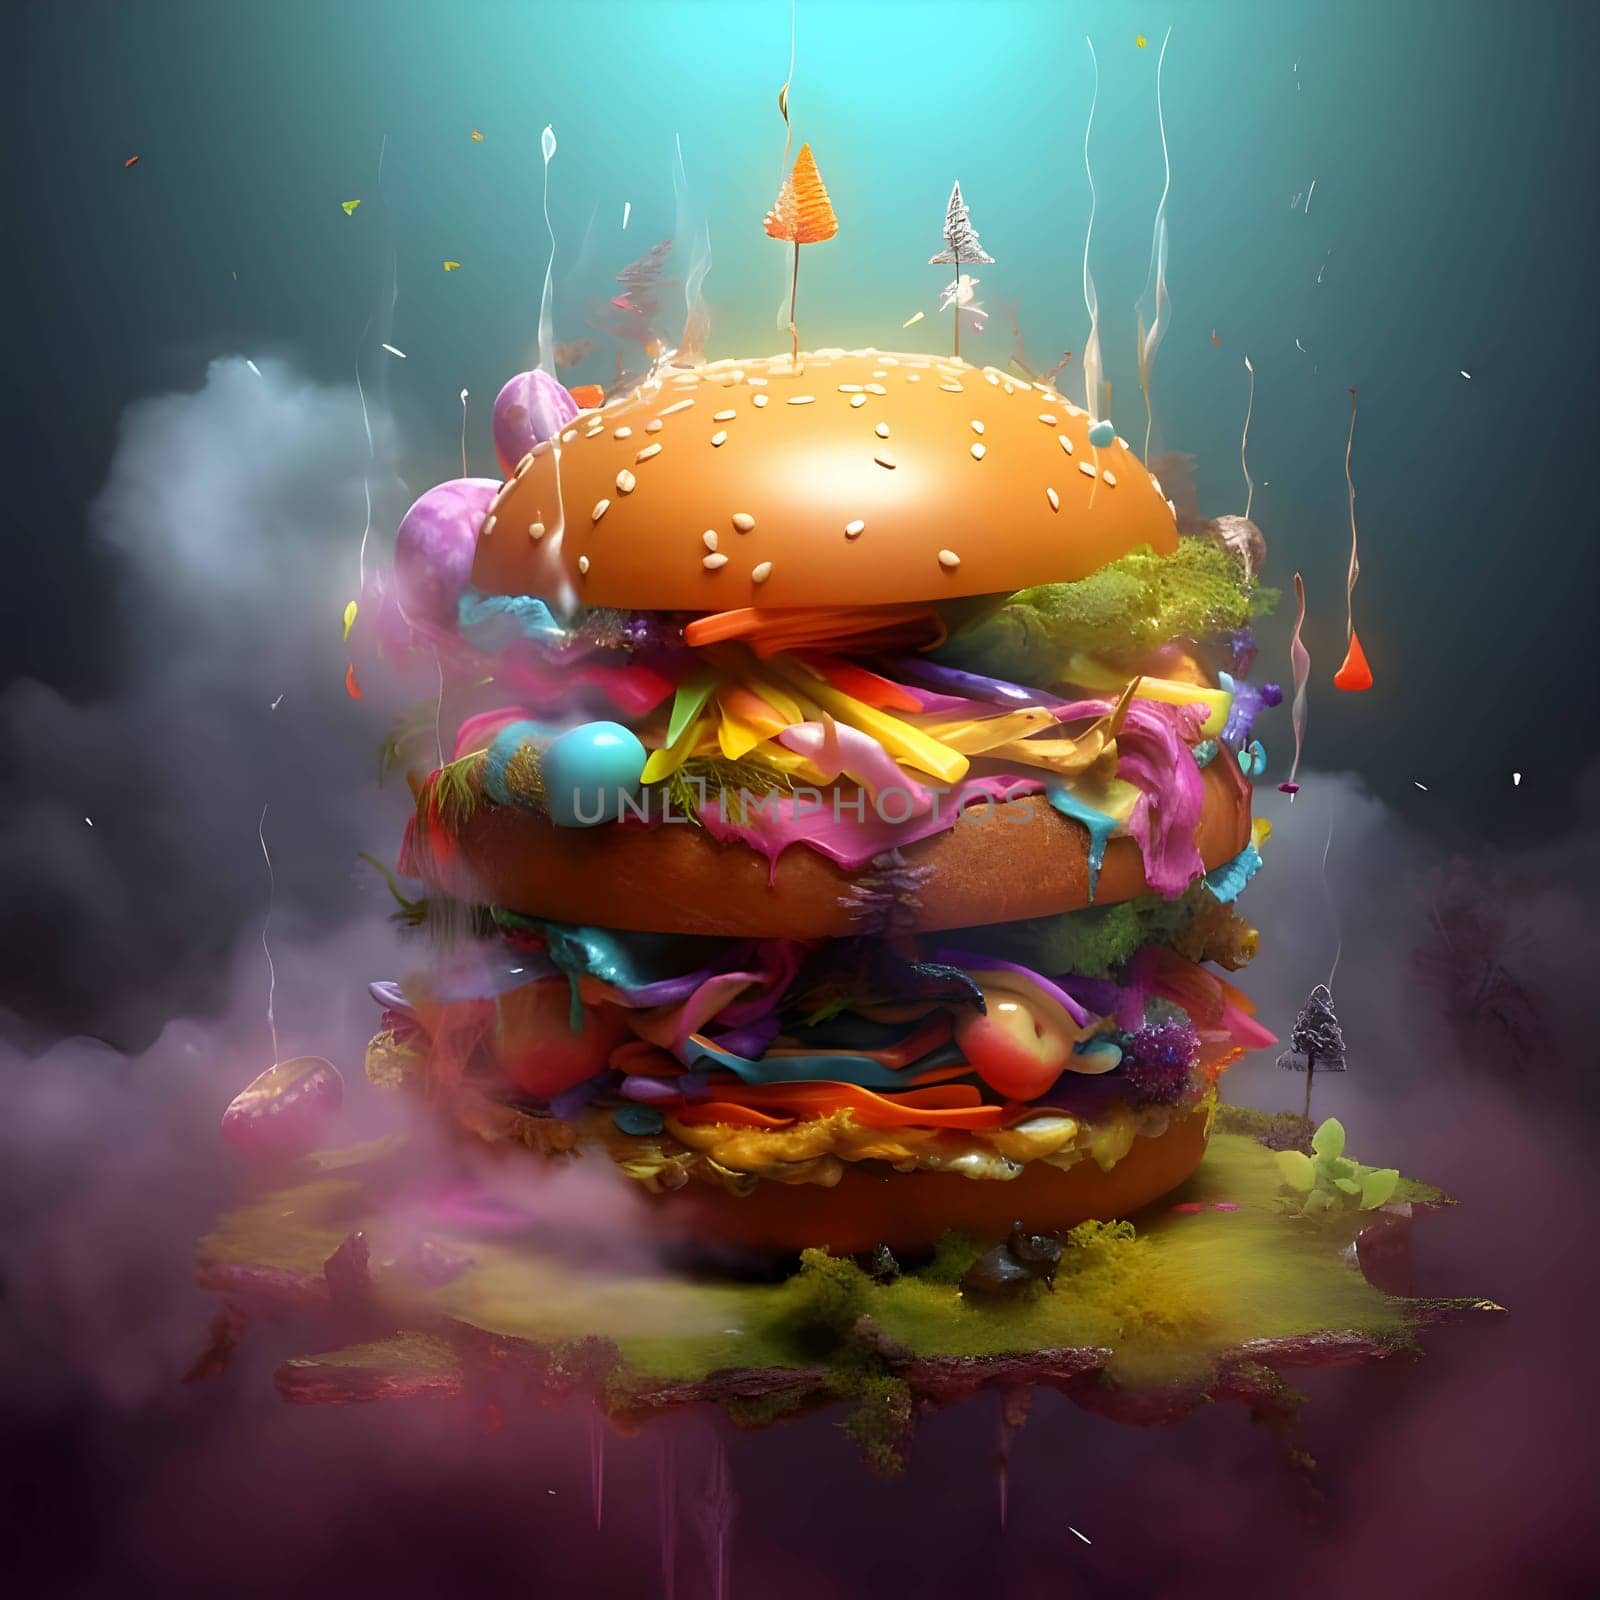 Abstract illustration - hamburger forest arrangement by ThemesS